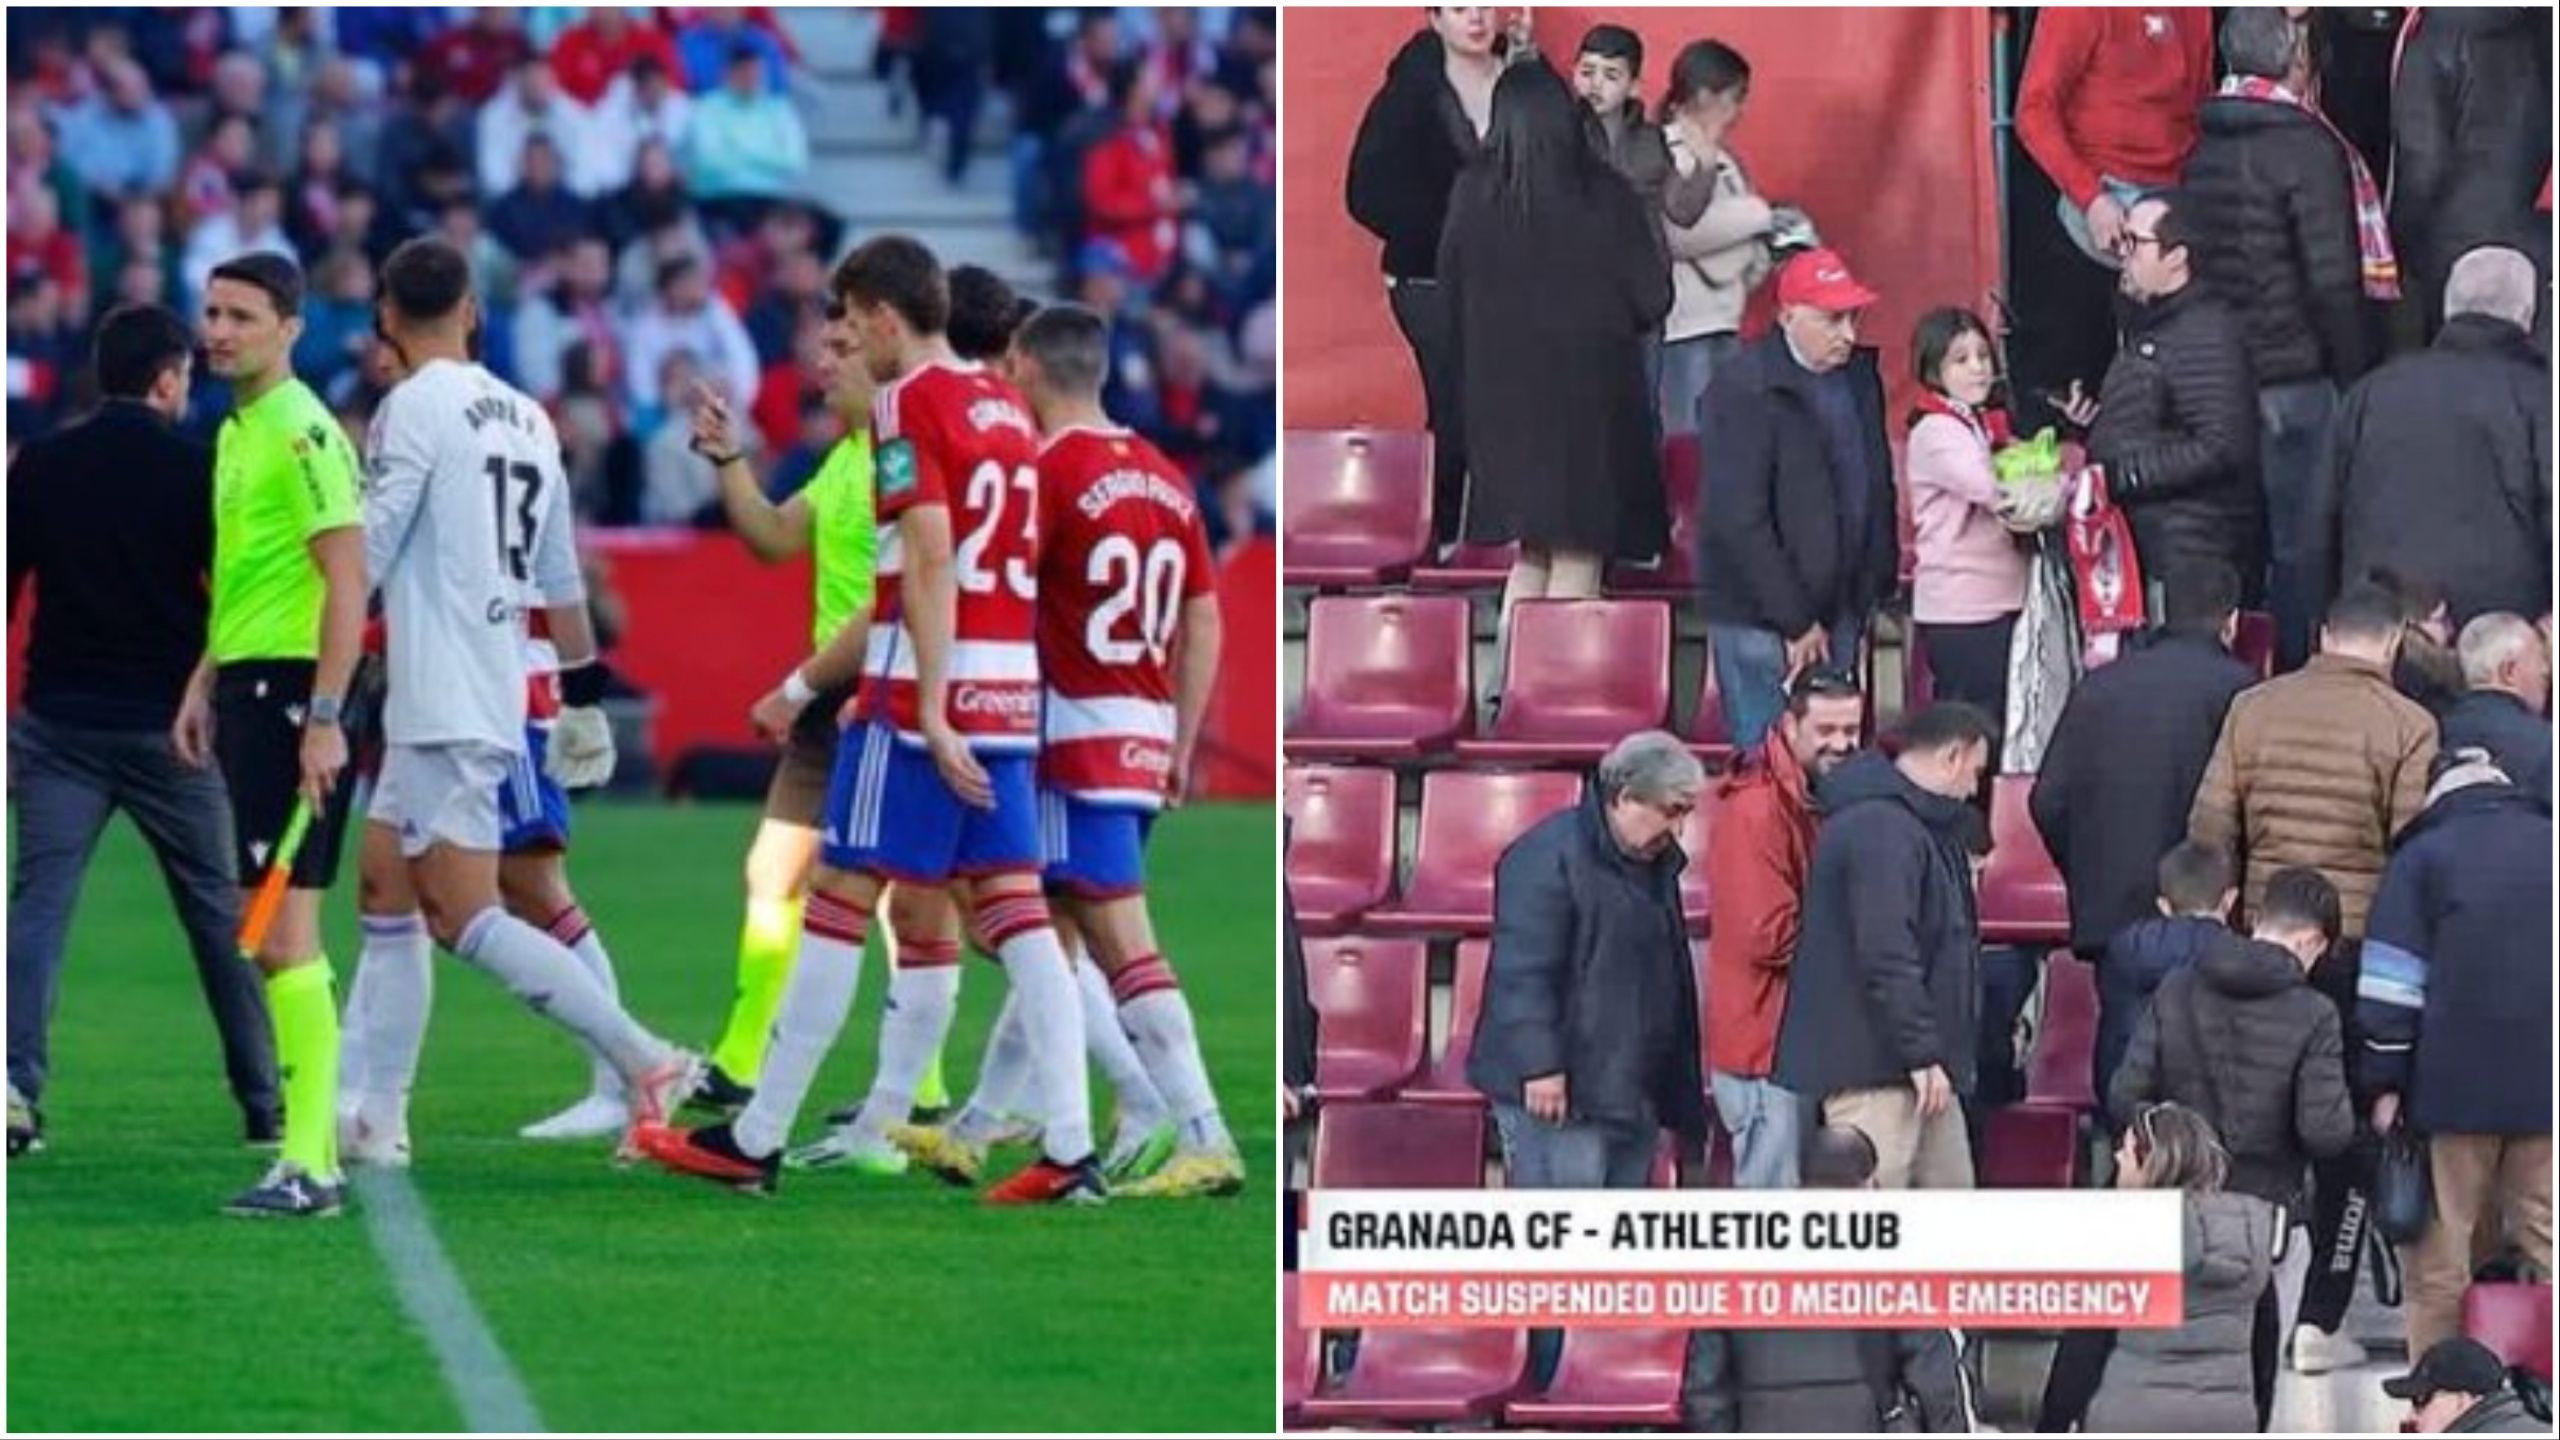 Granada vs Athletic Club suspended after death of a fan in the stadium